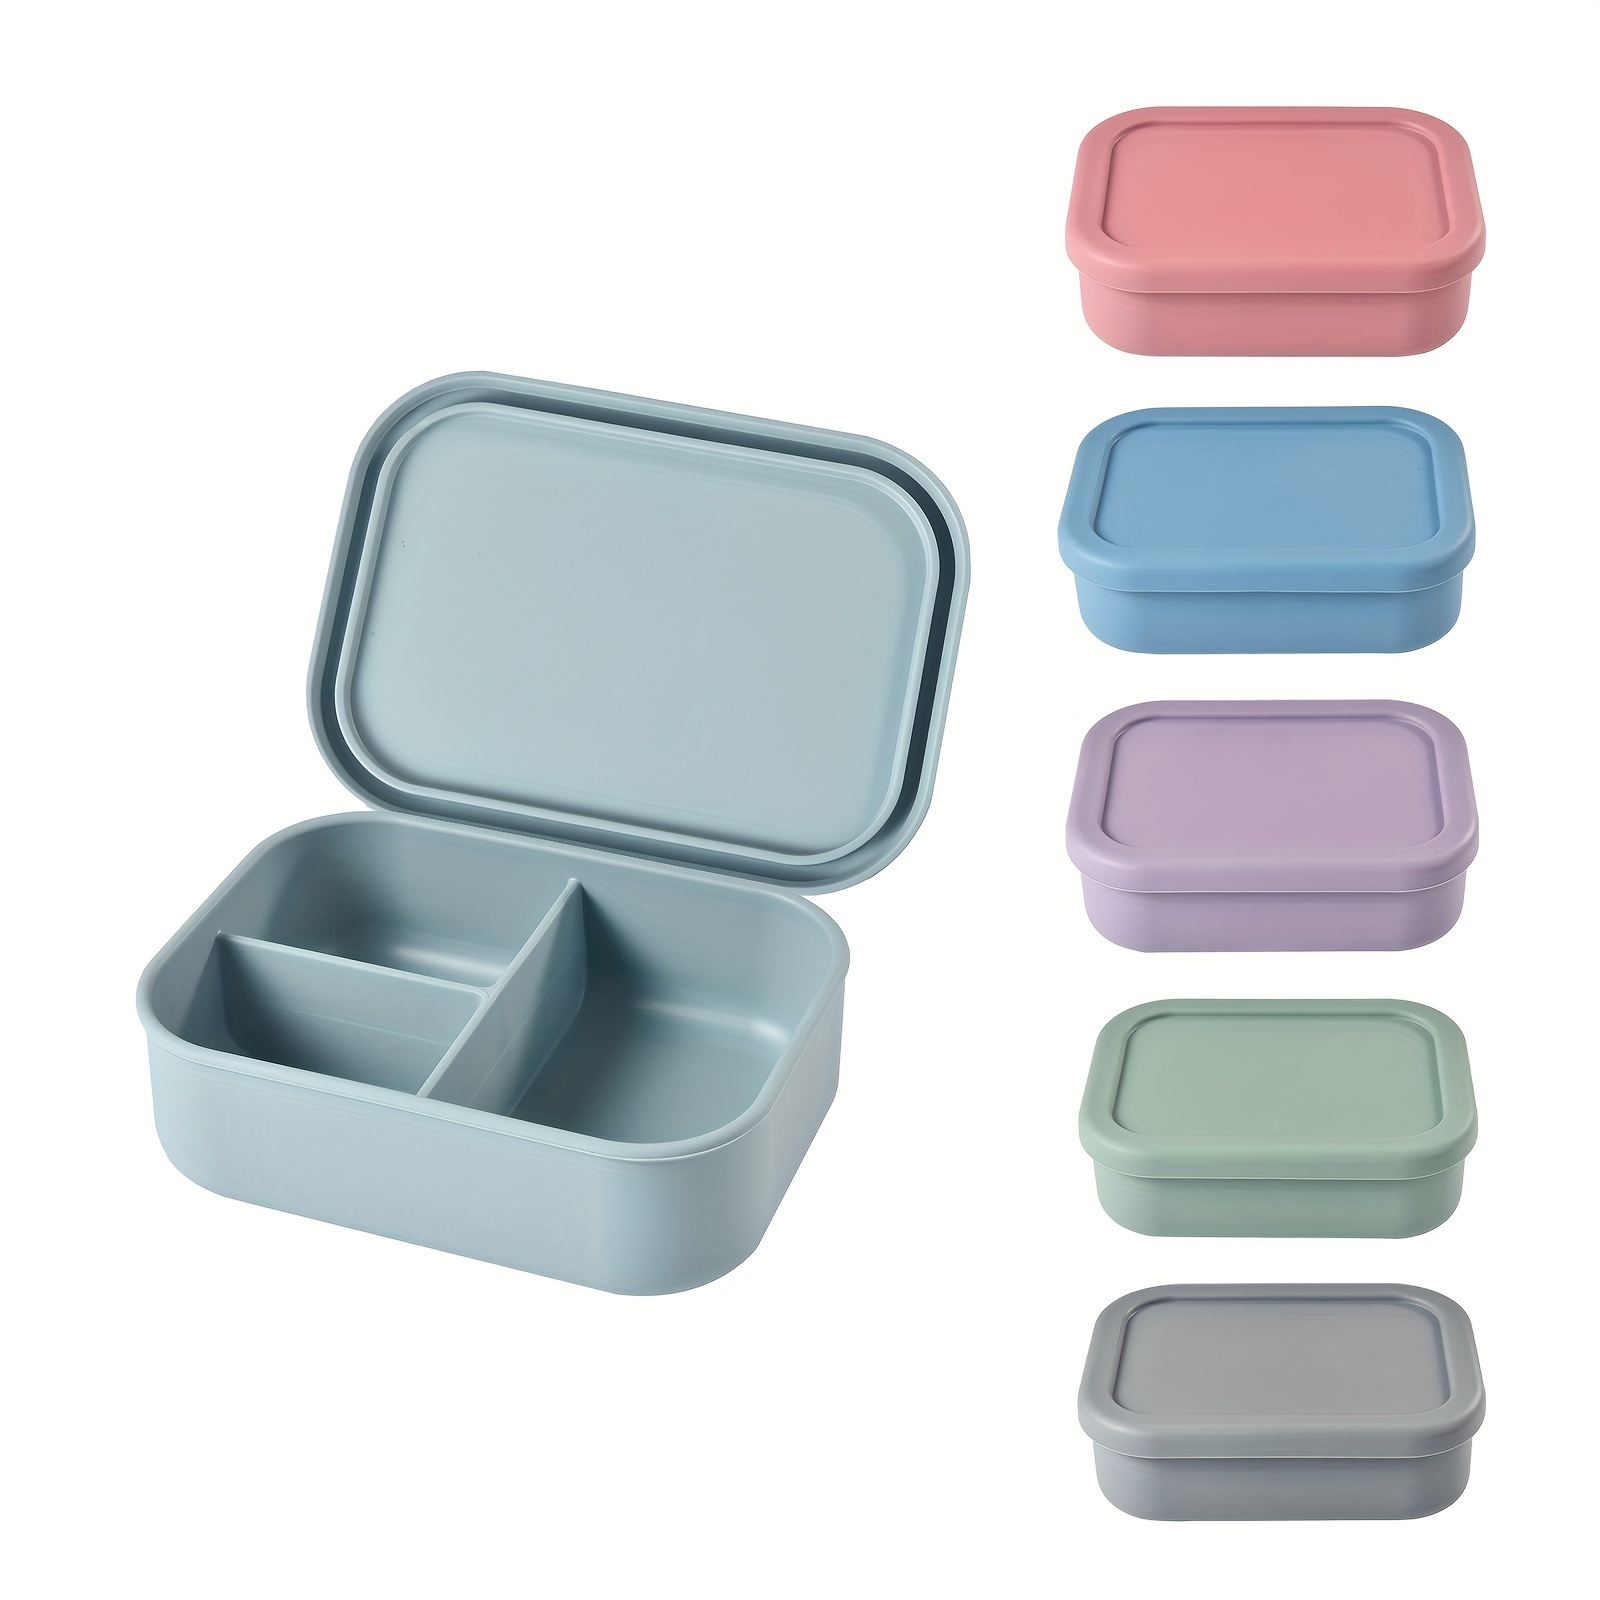 

1pc, Convenient Lunch Box Food Container, Reusable Silicone Lunch Box, Leak Proof 3 Compartments Adult Bento Box, Microwave Safe, For Indoor Outdoor Lunch